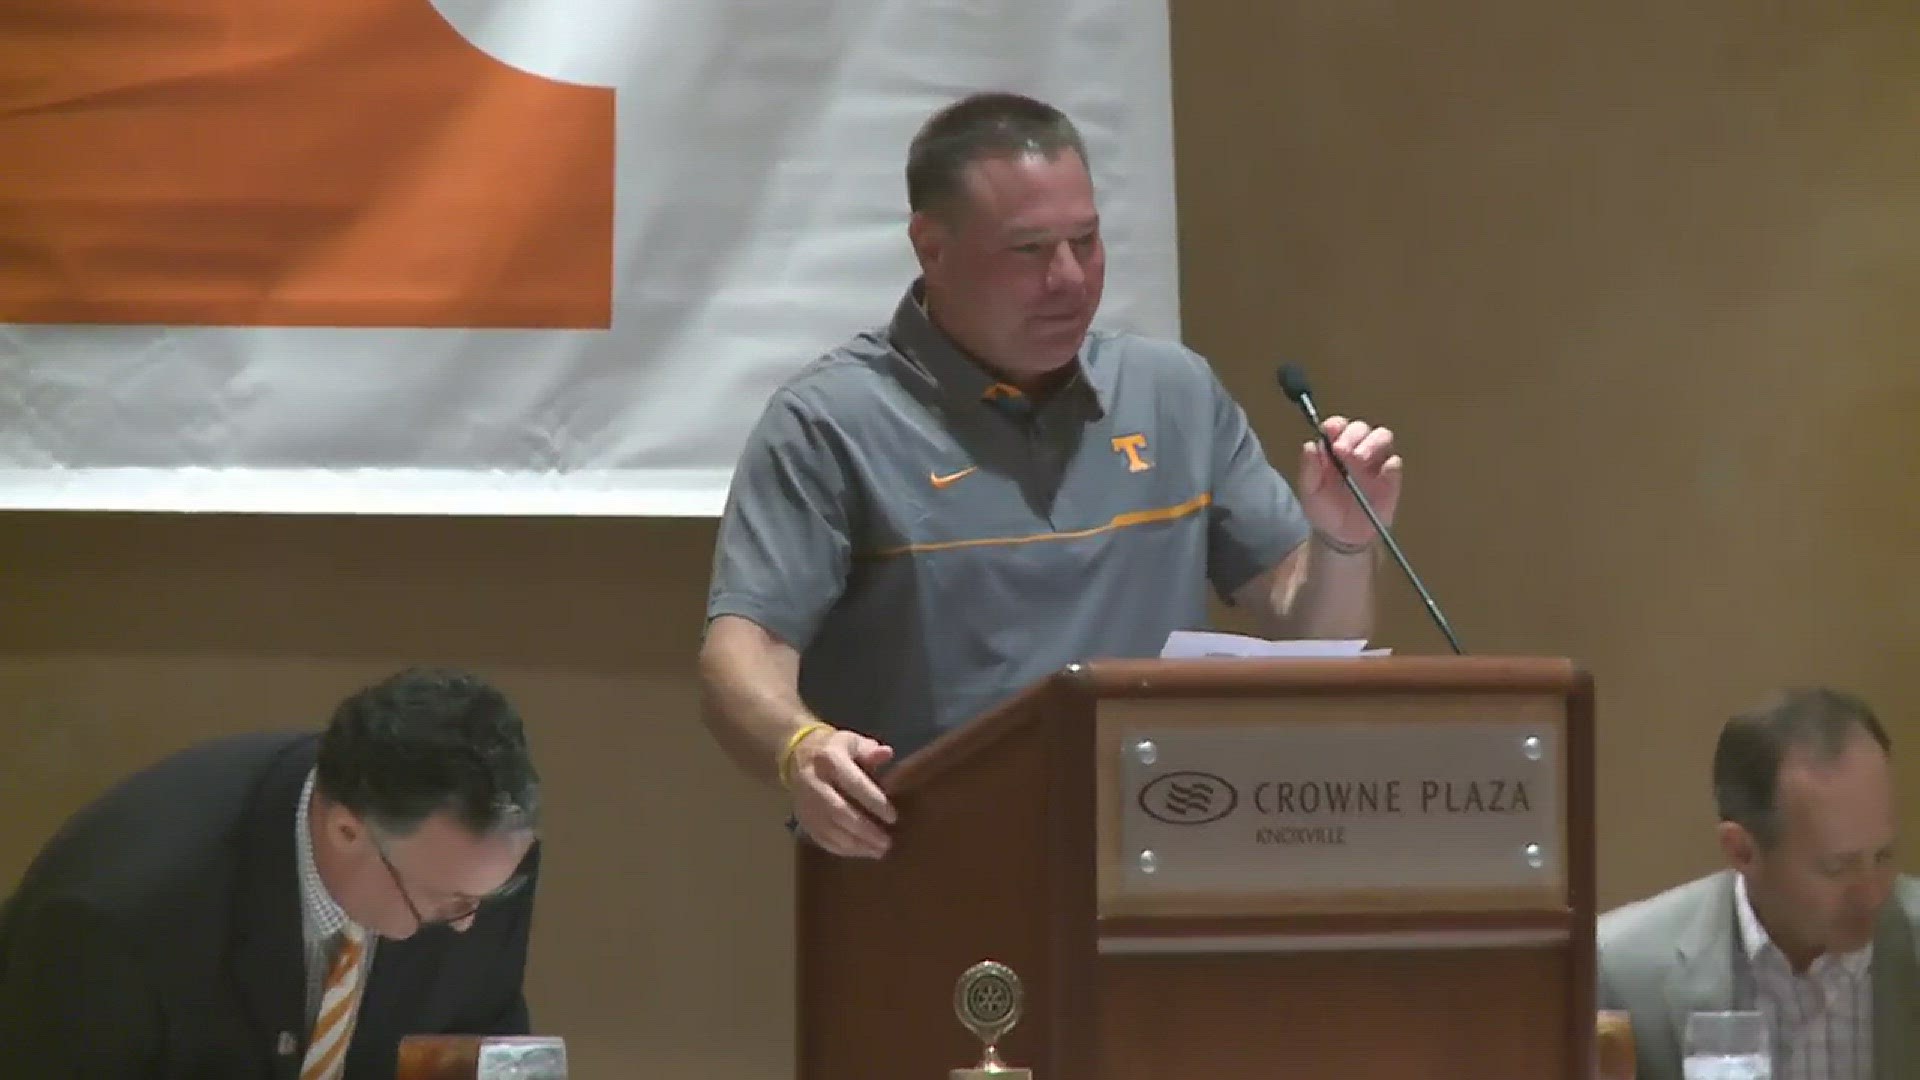 Coach Jones answers questions from fans and talks about how he runs his football program.